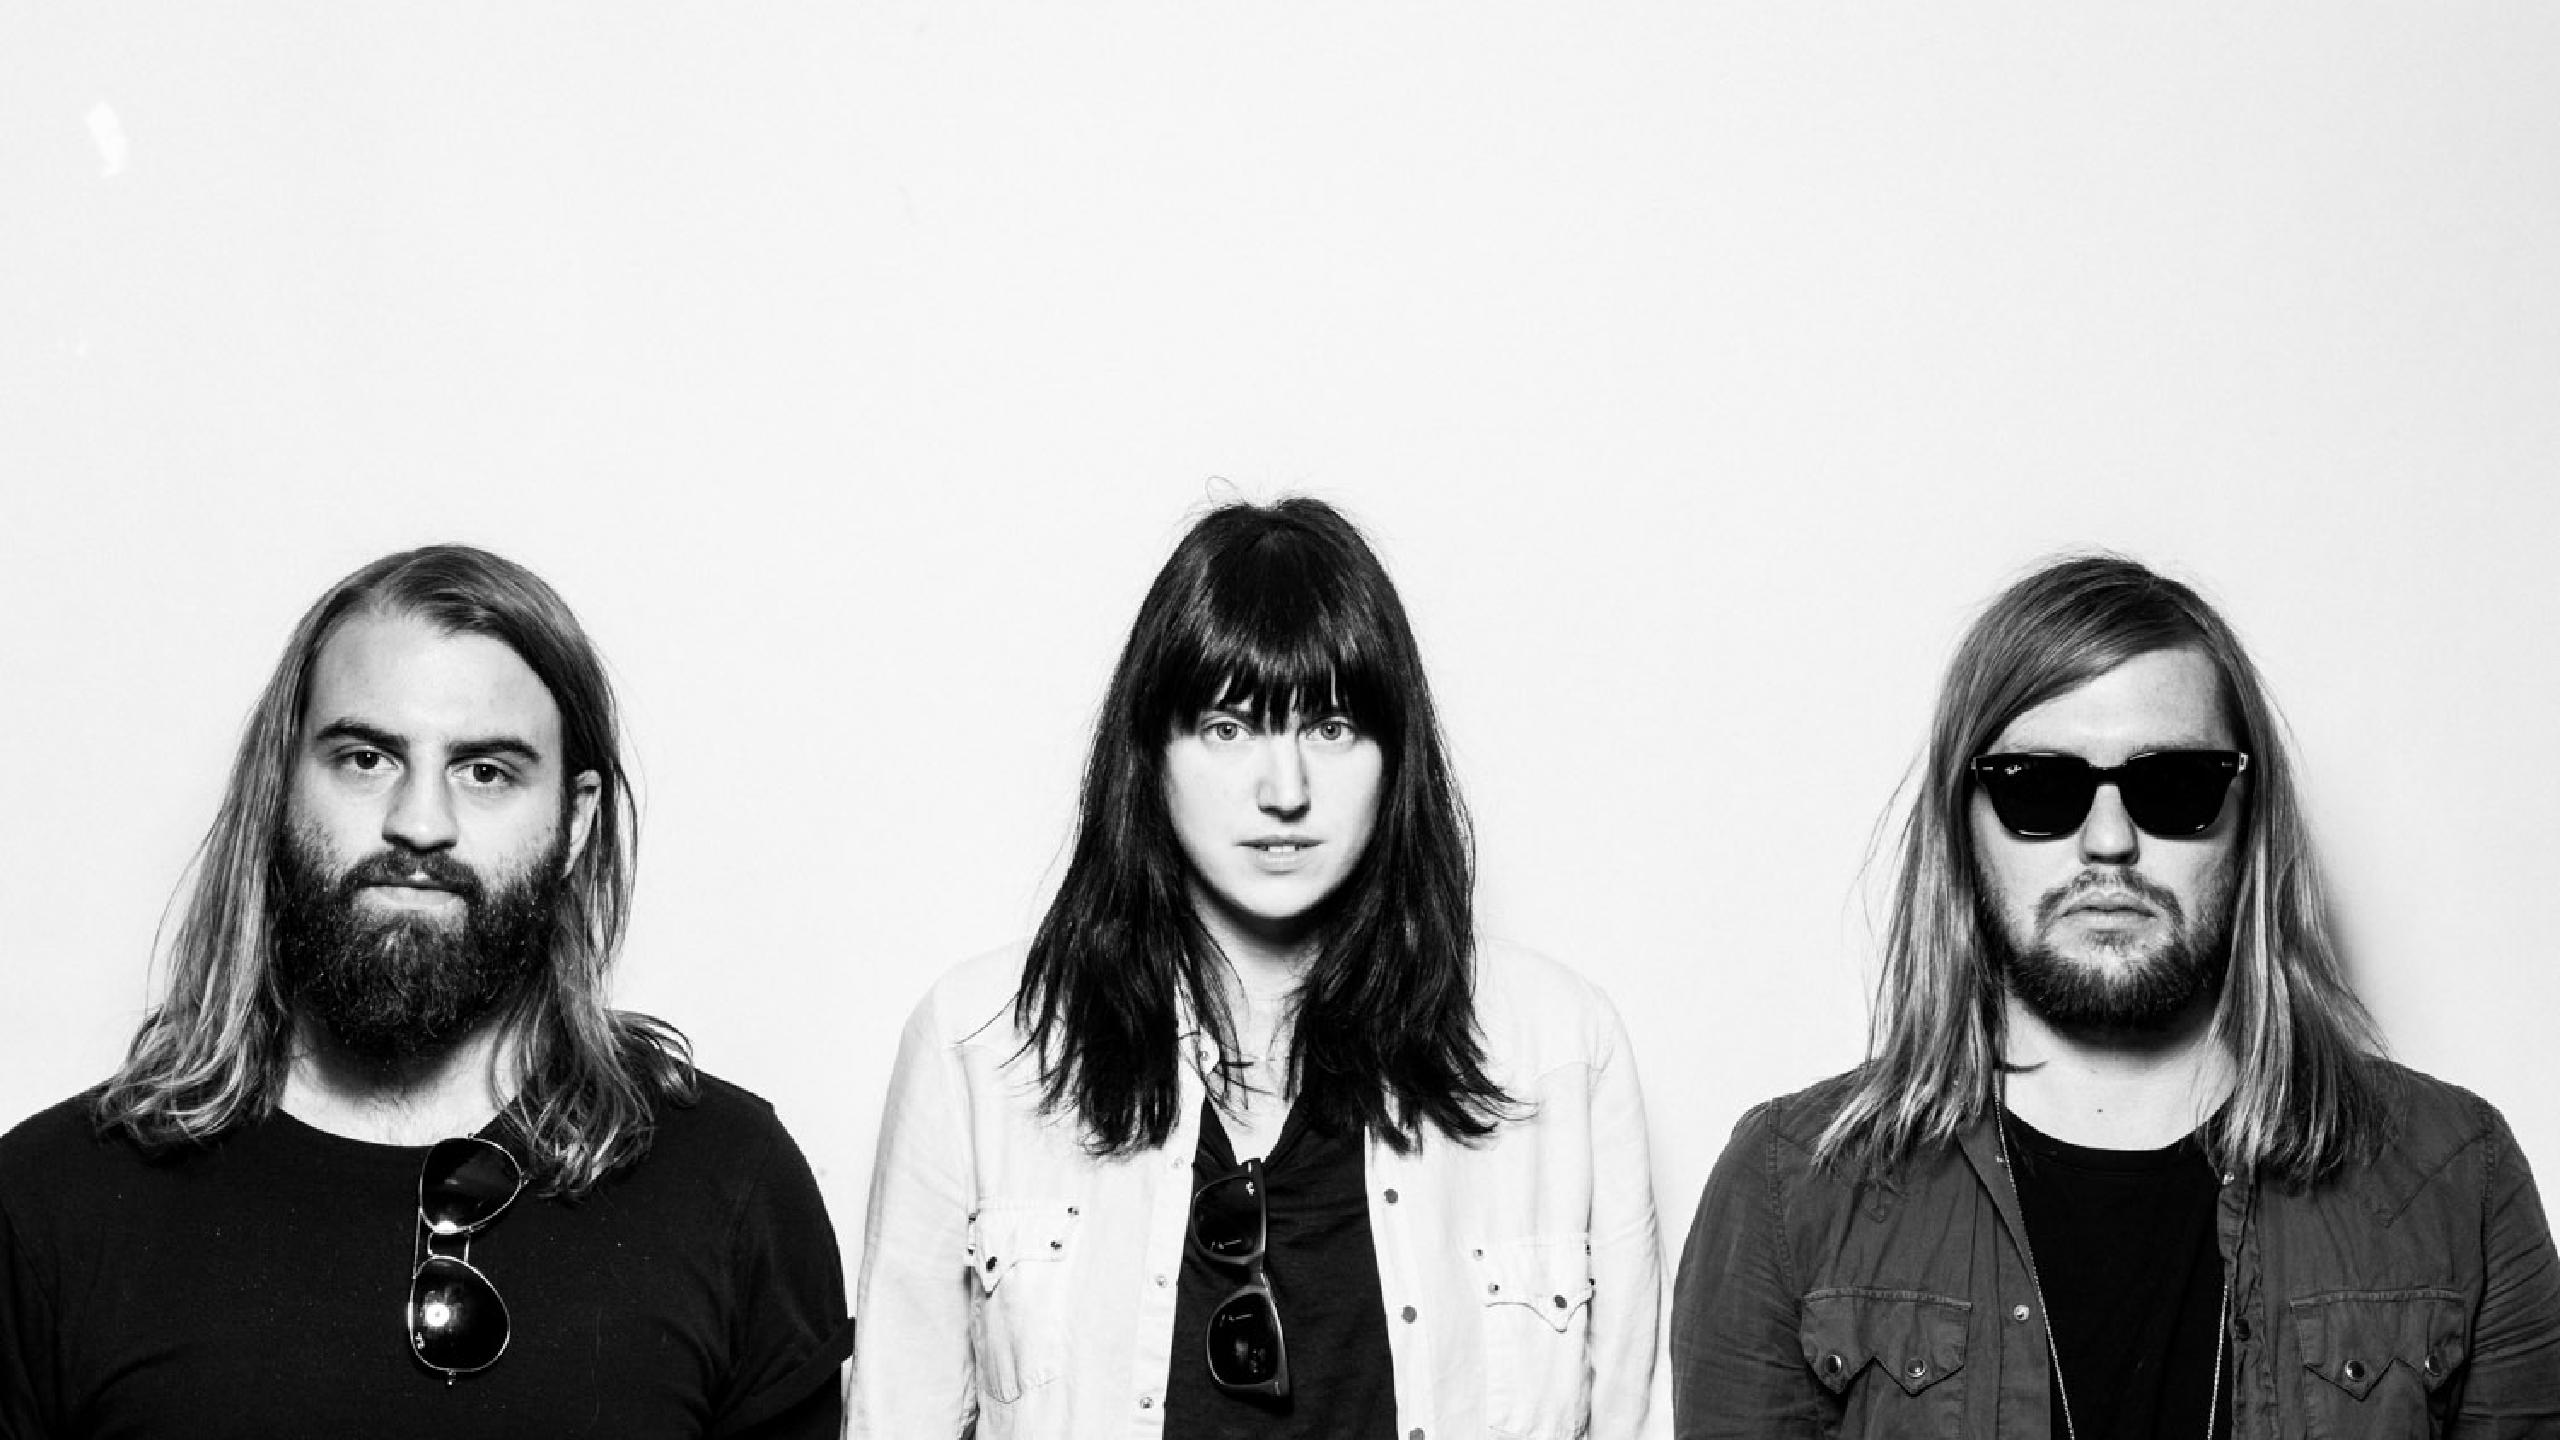 RECORD OF THE WEEK – BAND OF SKULLS – LOVE IS ALL YOU LOVE